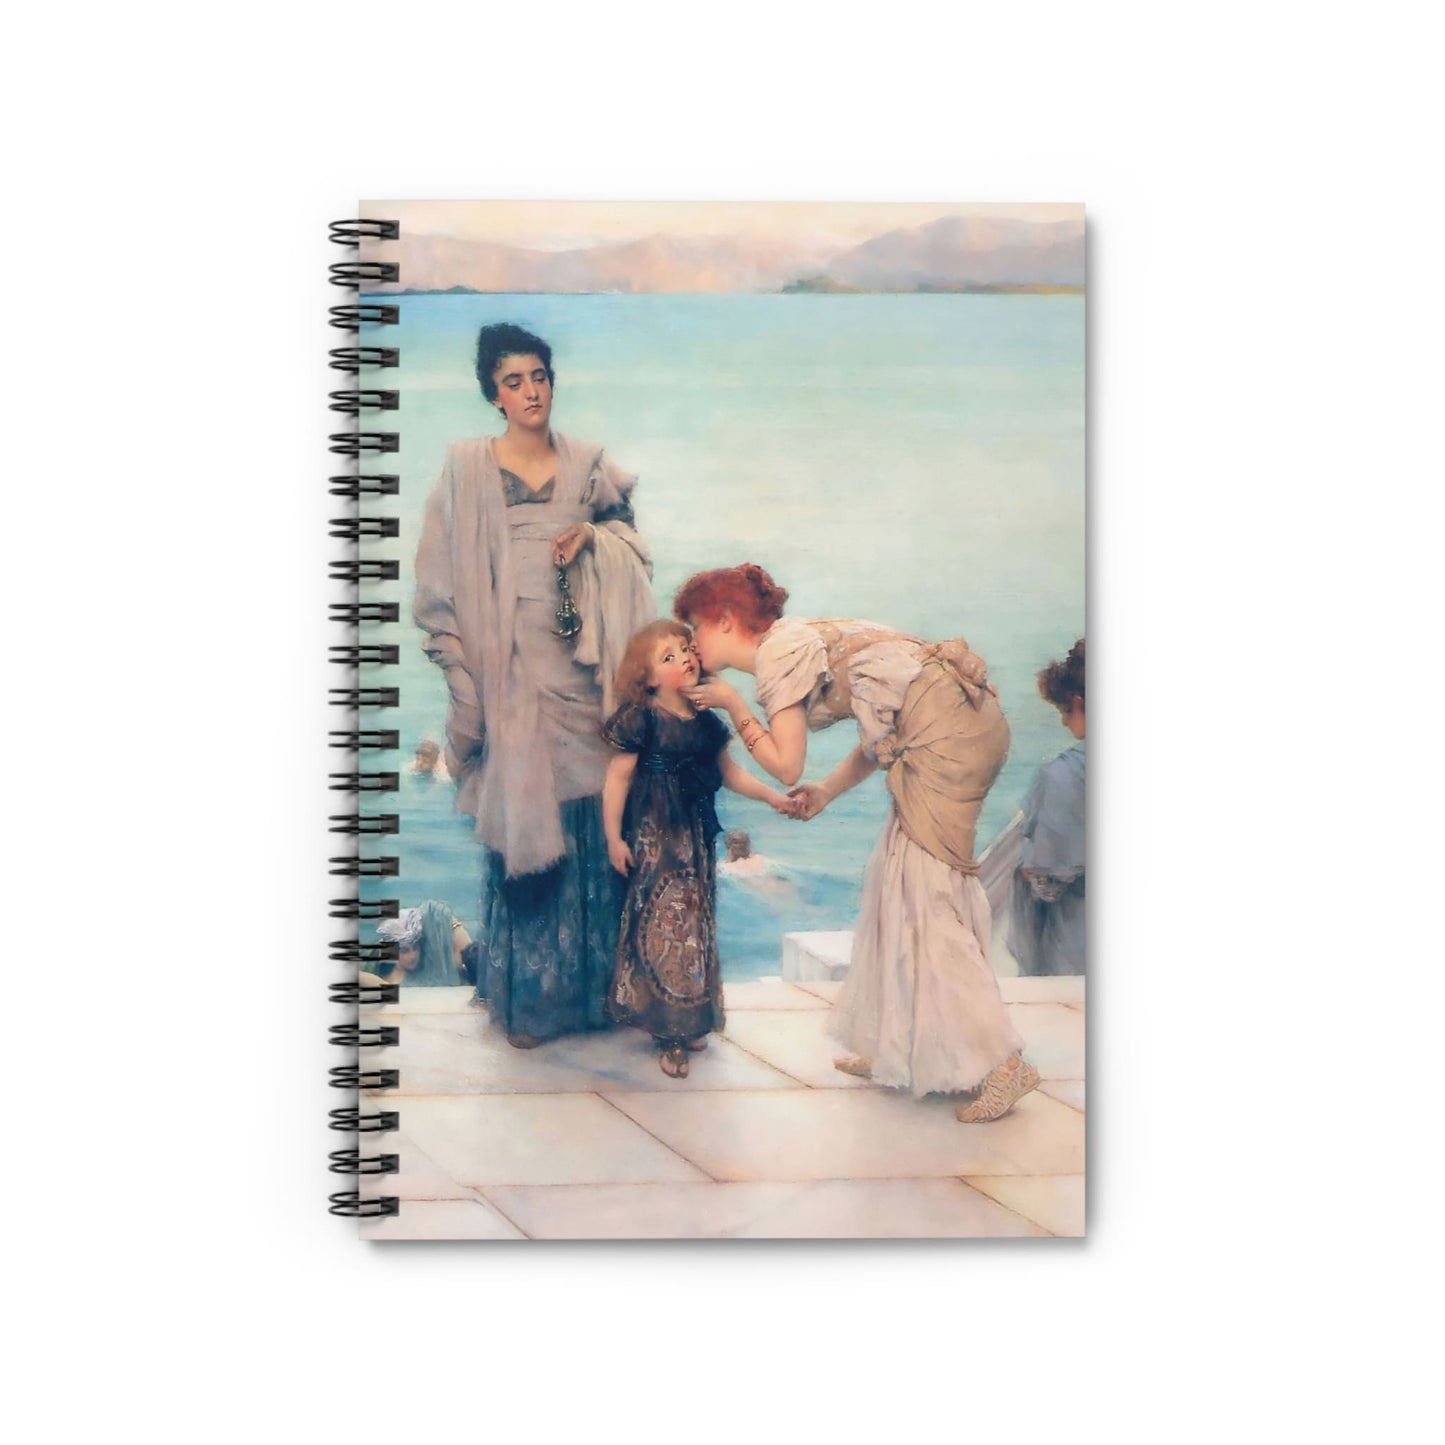 Romanticism Notebook with Victorian cover, great for journaling and planning, highlighting a Victorian-themed Romanticism design.